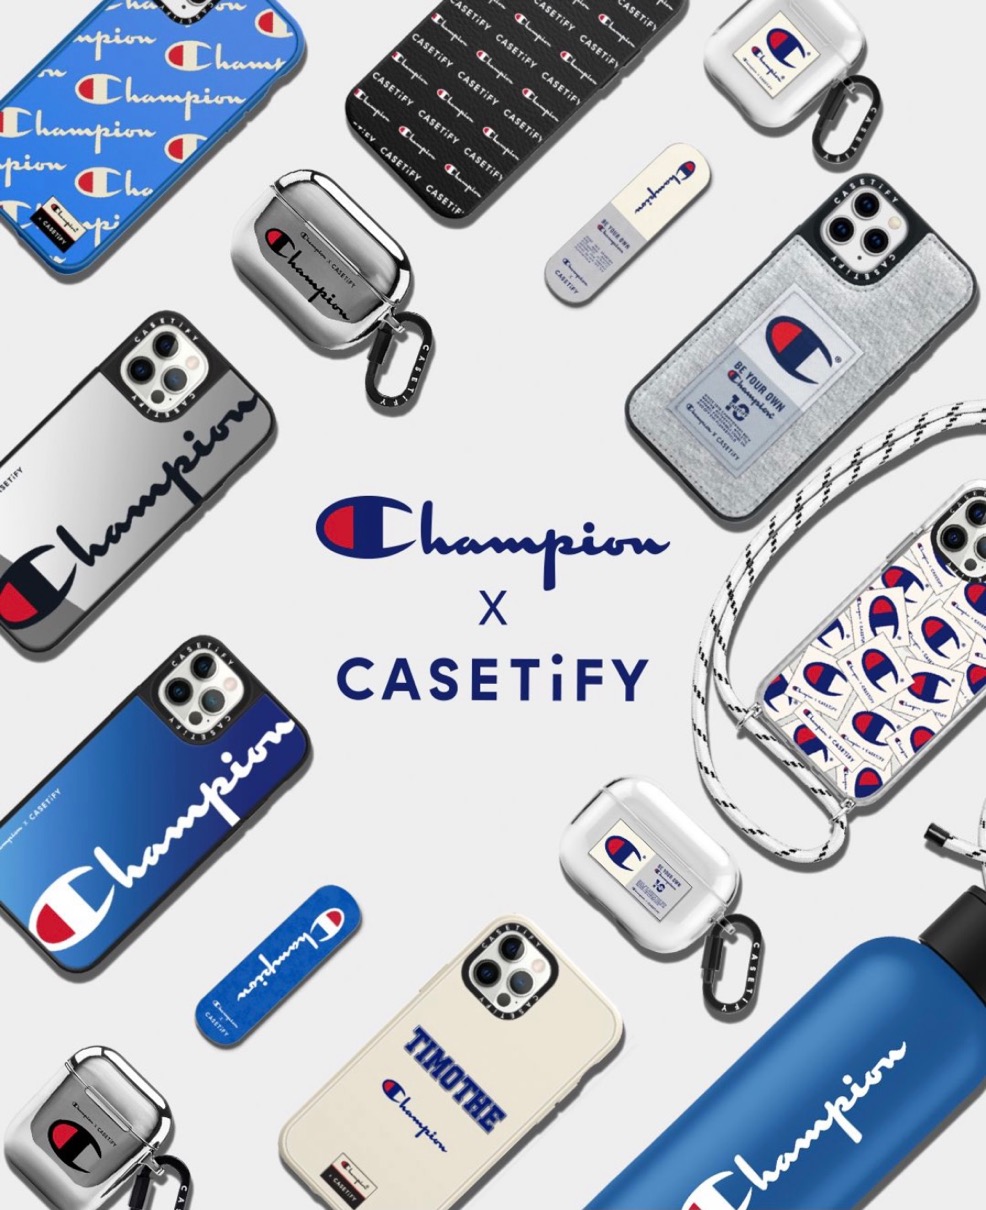 casetify×champion iPhone12/proケース